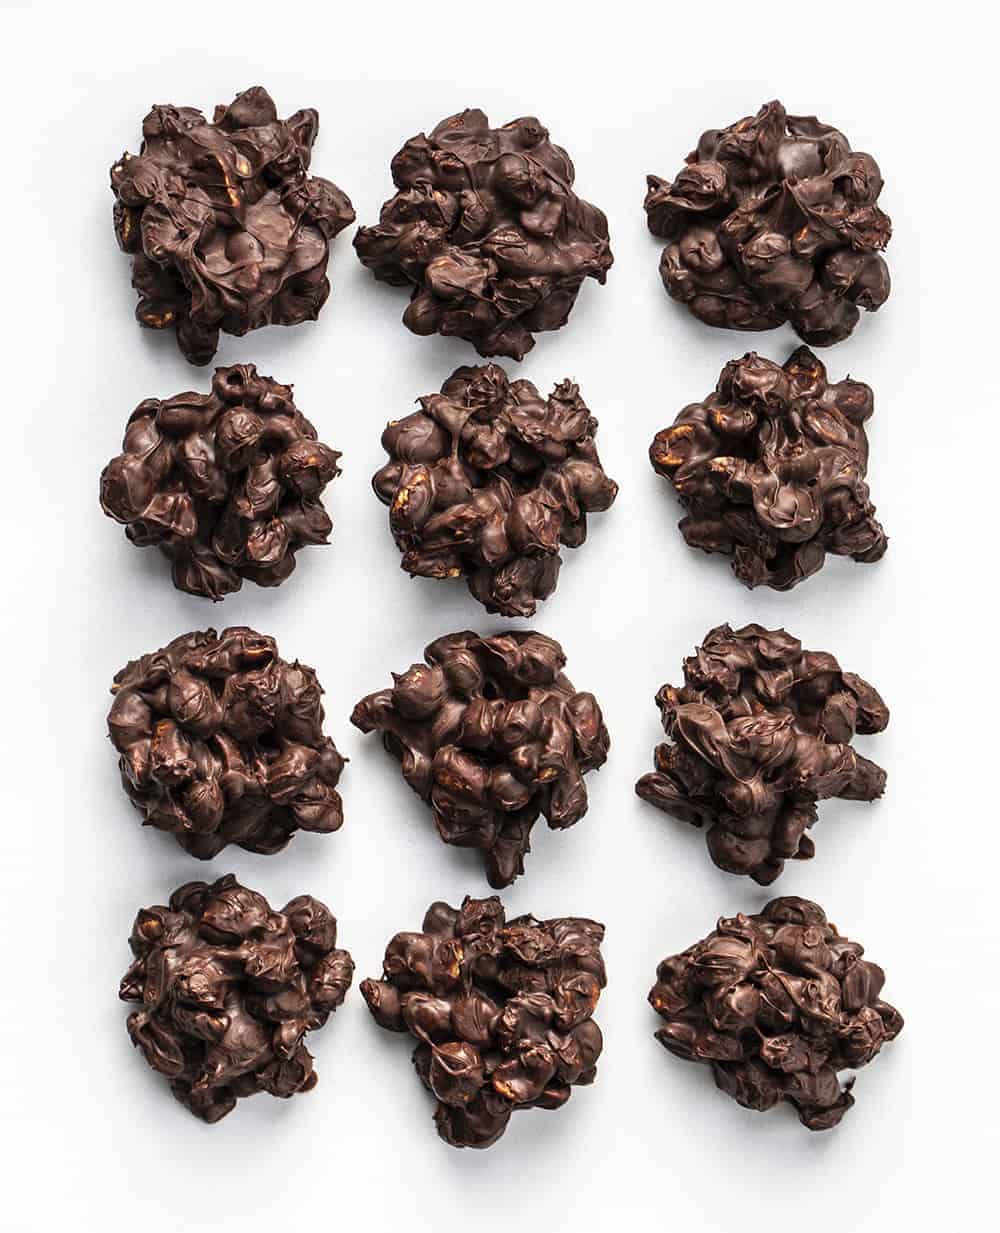 Overhead view of Chocolate Peanut Clusters